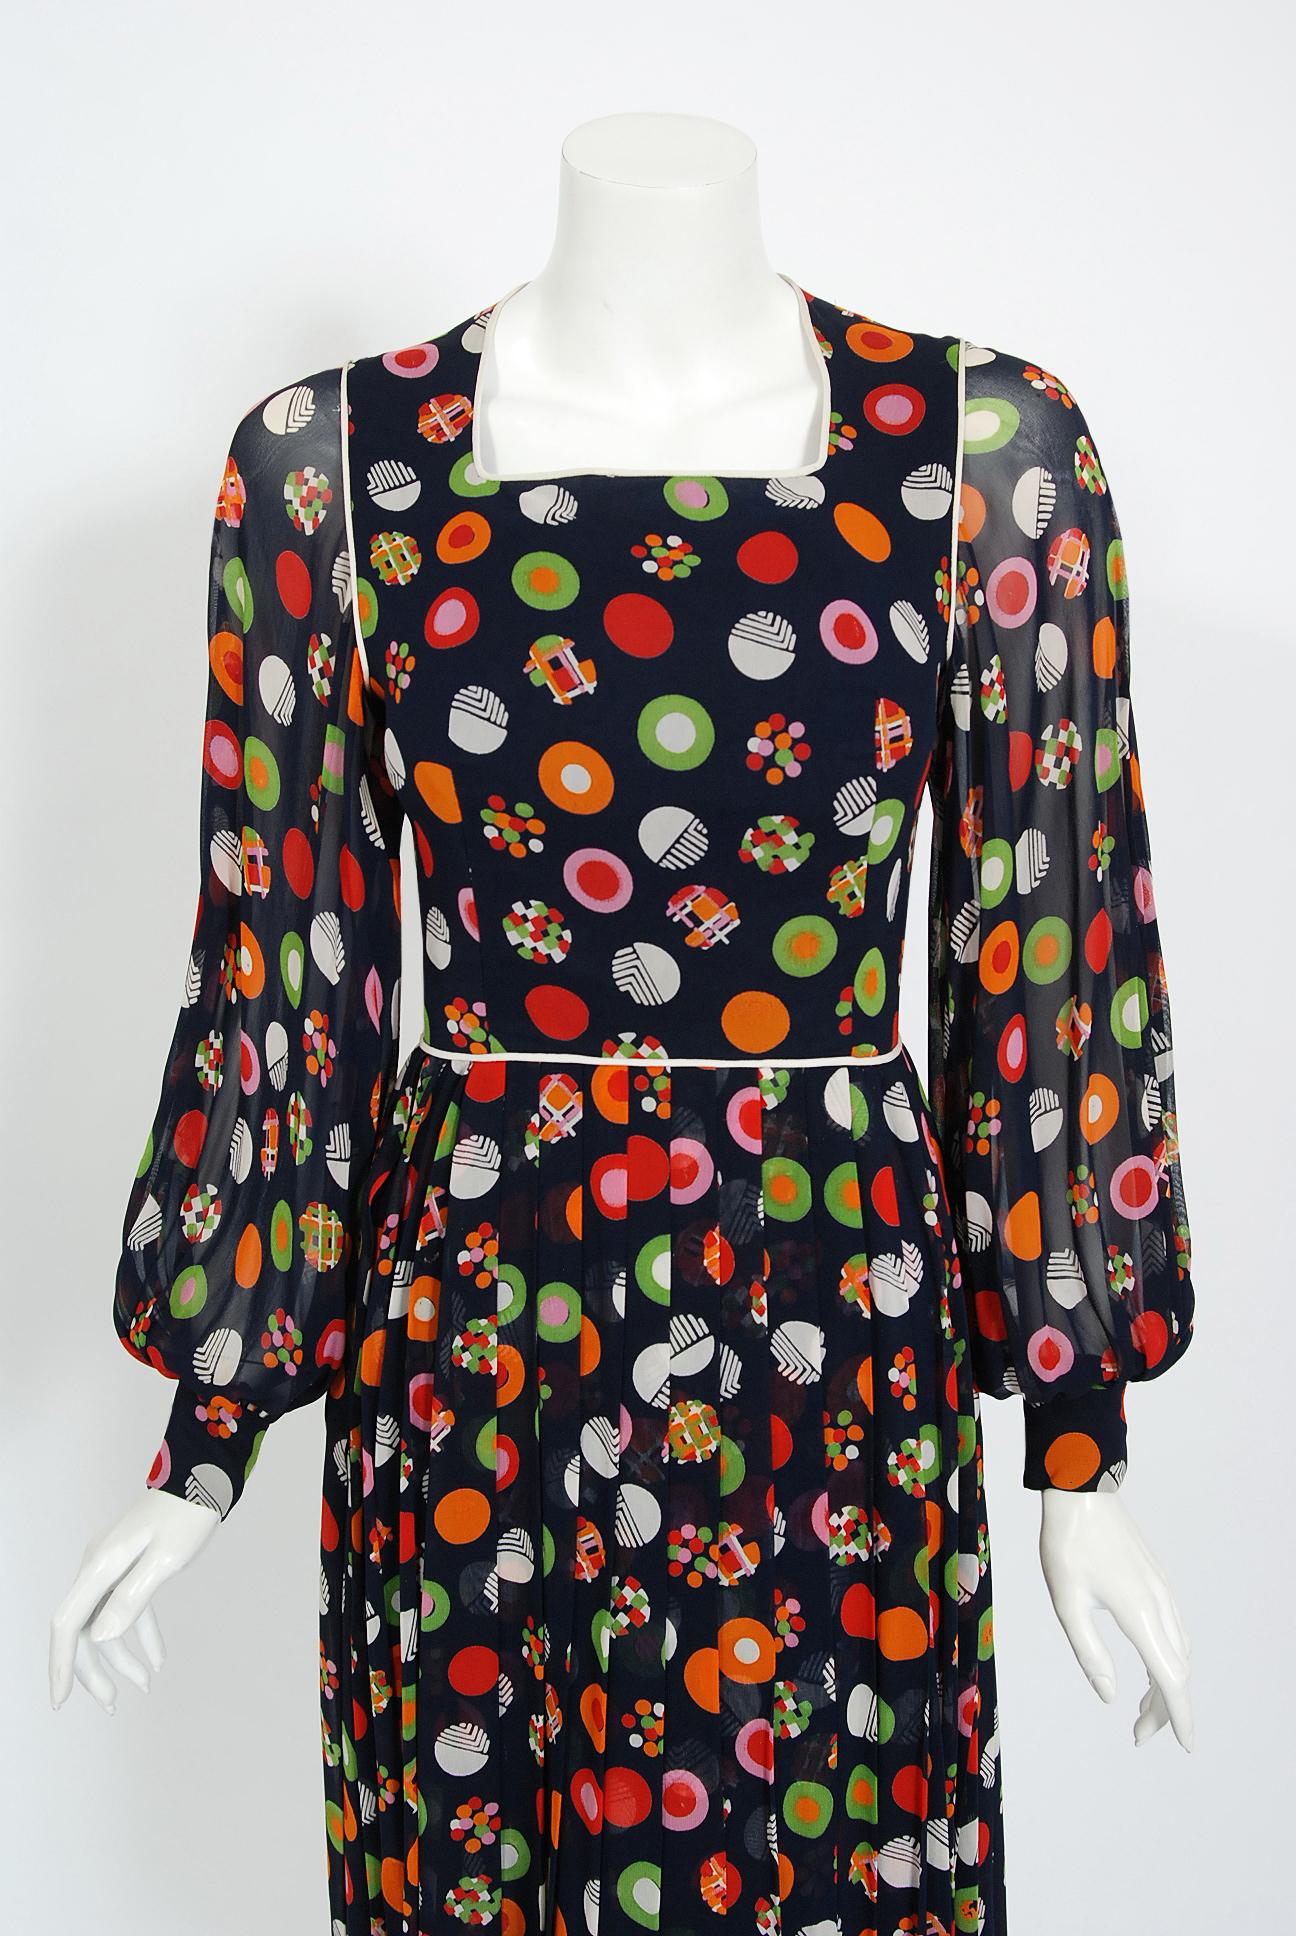 Gorgeous Christian Dior numbered demi-couture colorful print silk chiffon dress dating back to 1972. Christian Dior designed under his own name for only a decade, but his influence is everlasting. When the talented Marc Bohan took over as head